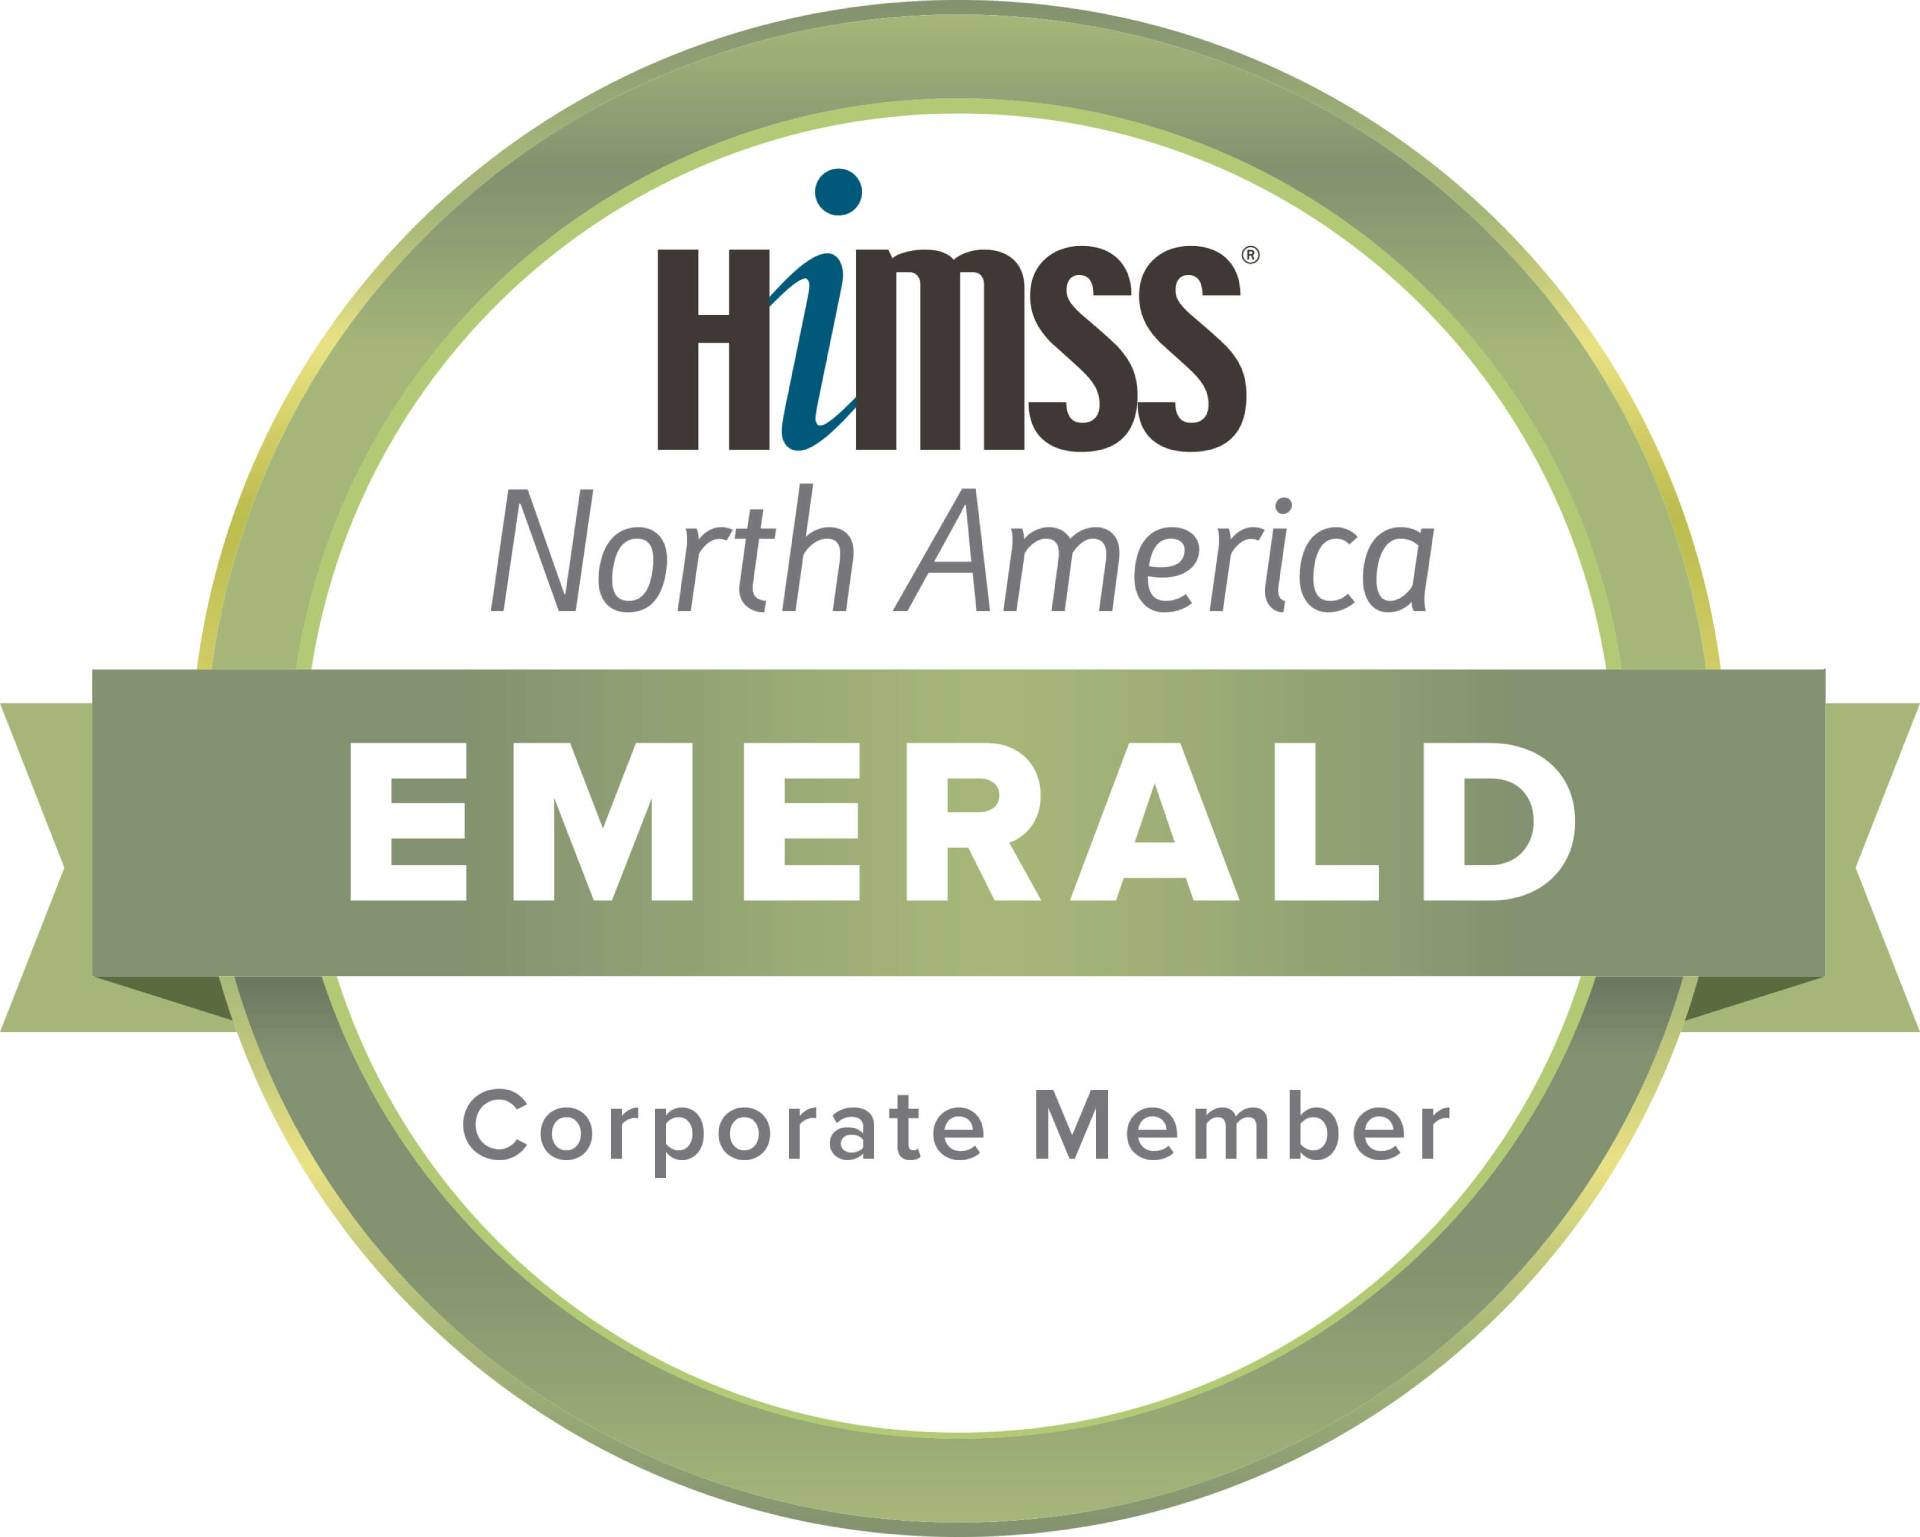 efax-corporate-himss-conference-seal-emerald-membership